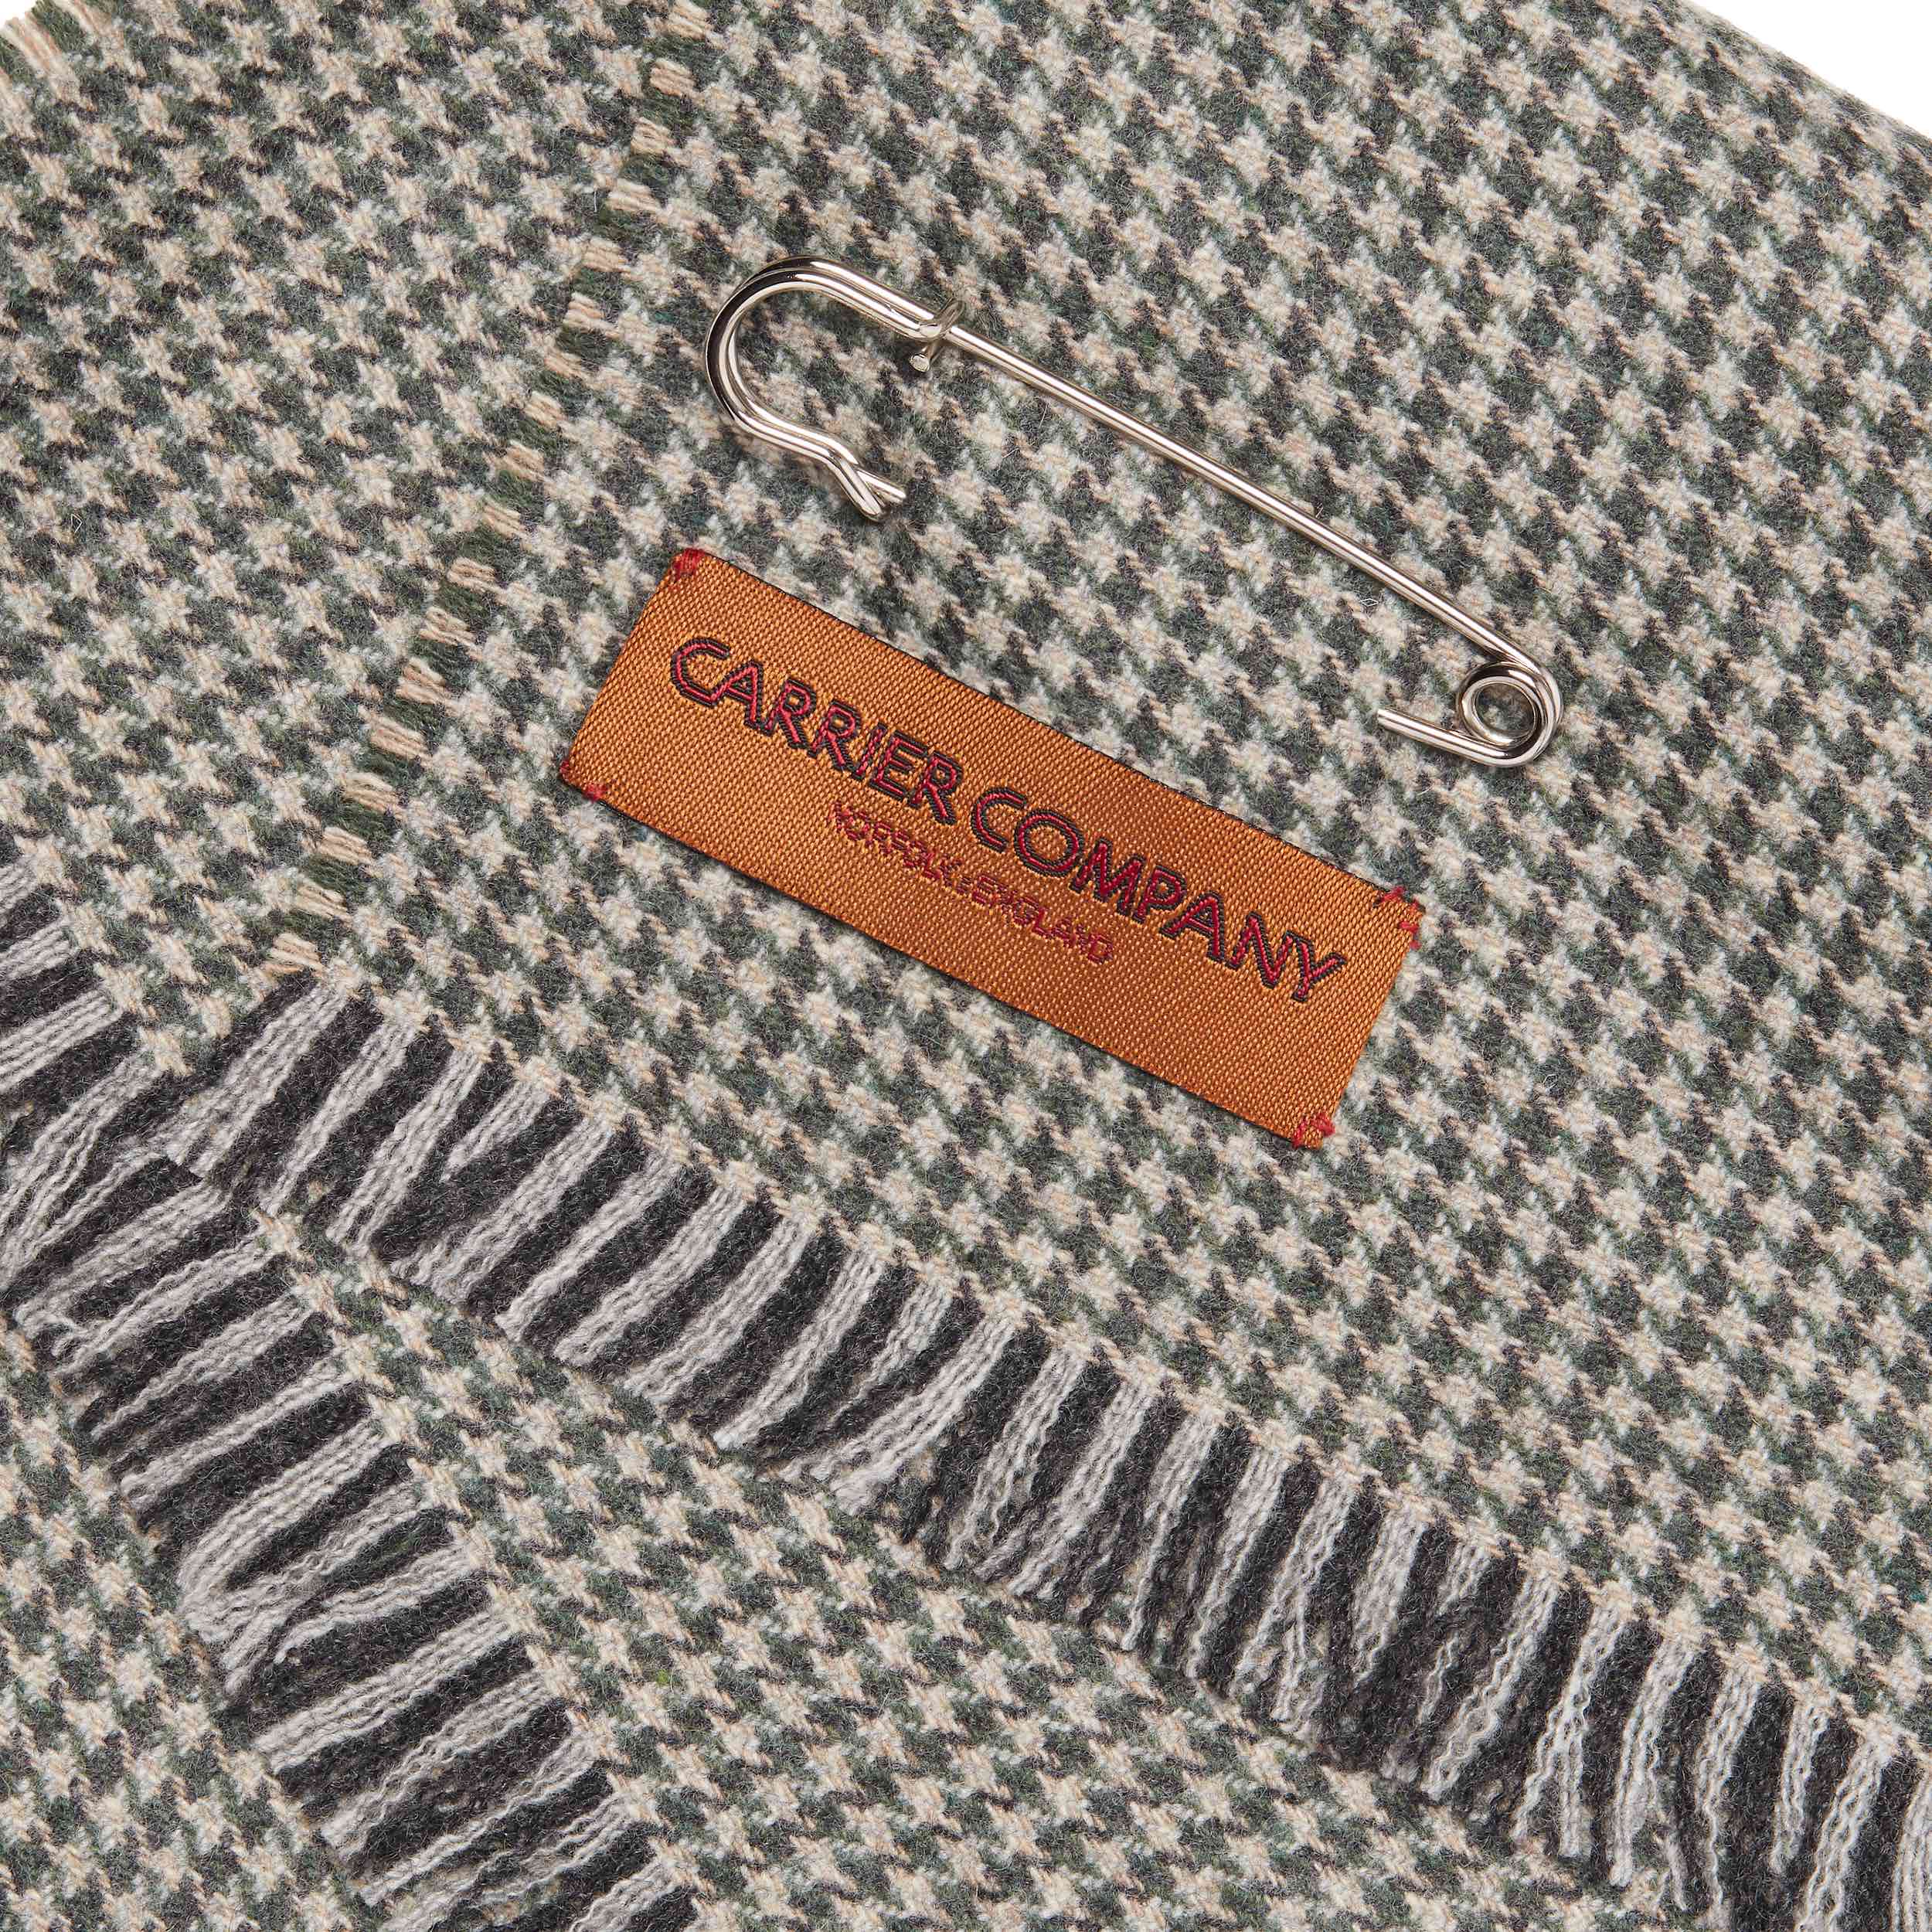 Carrier Company Cashmere Short Scarf in Green Houndstooth